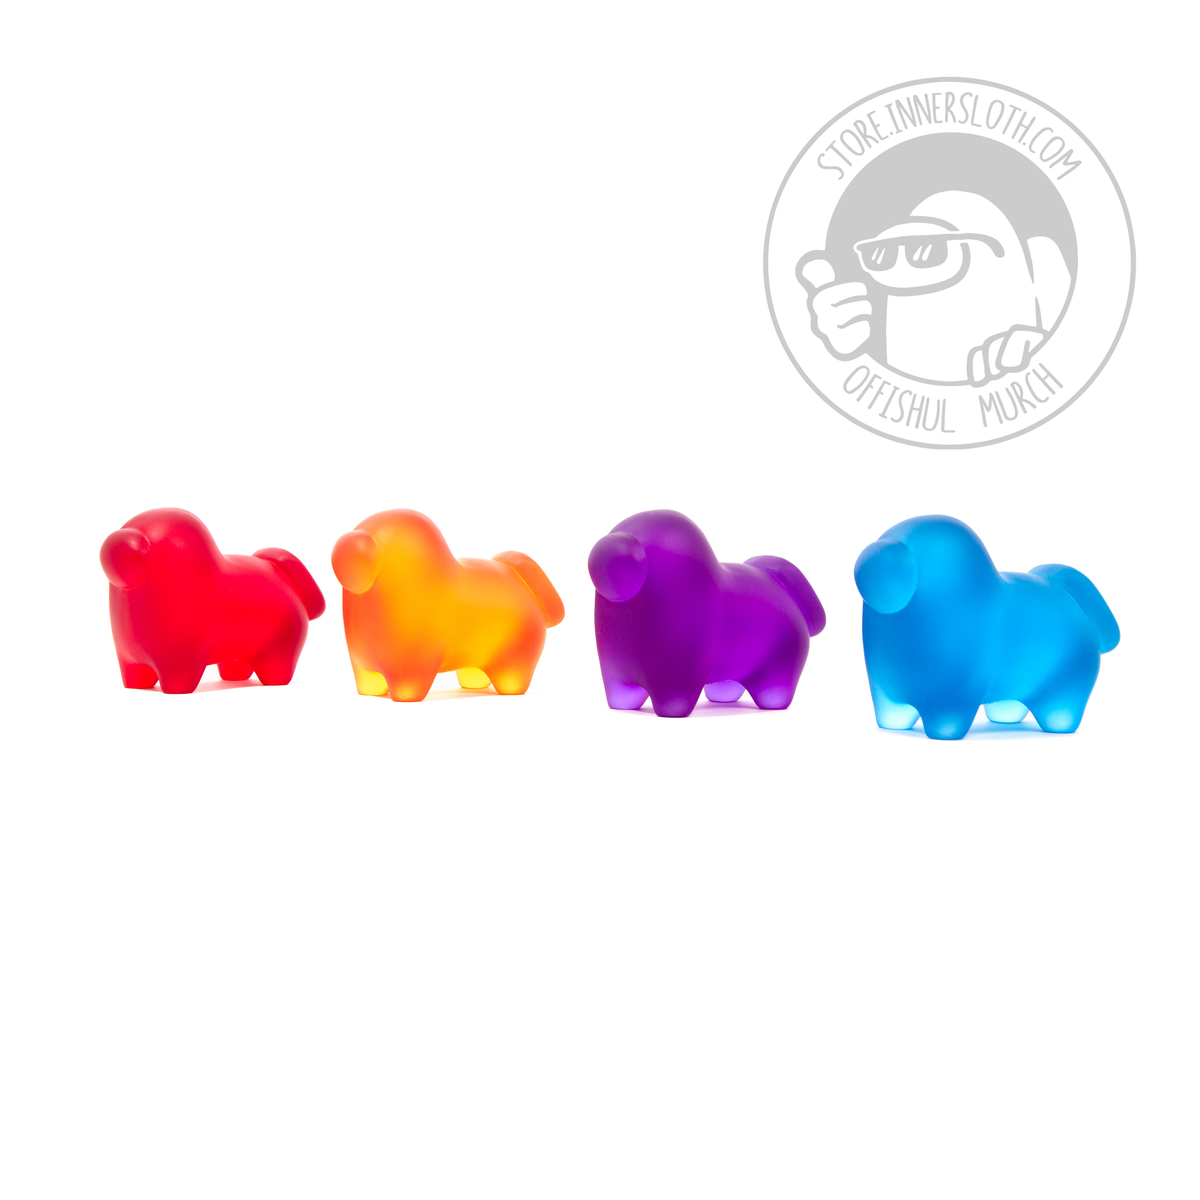 A photograph of all four translucent Crewgi Figurines on a white background. They are standing side-by-side in a diagonal profile view spaced out from each other. The order of Crewgis left to right is red, orange, purple, blue.  